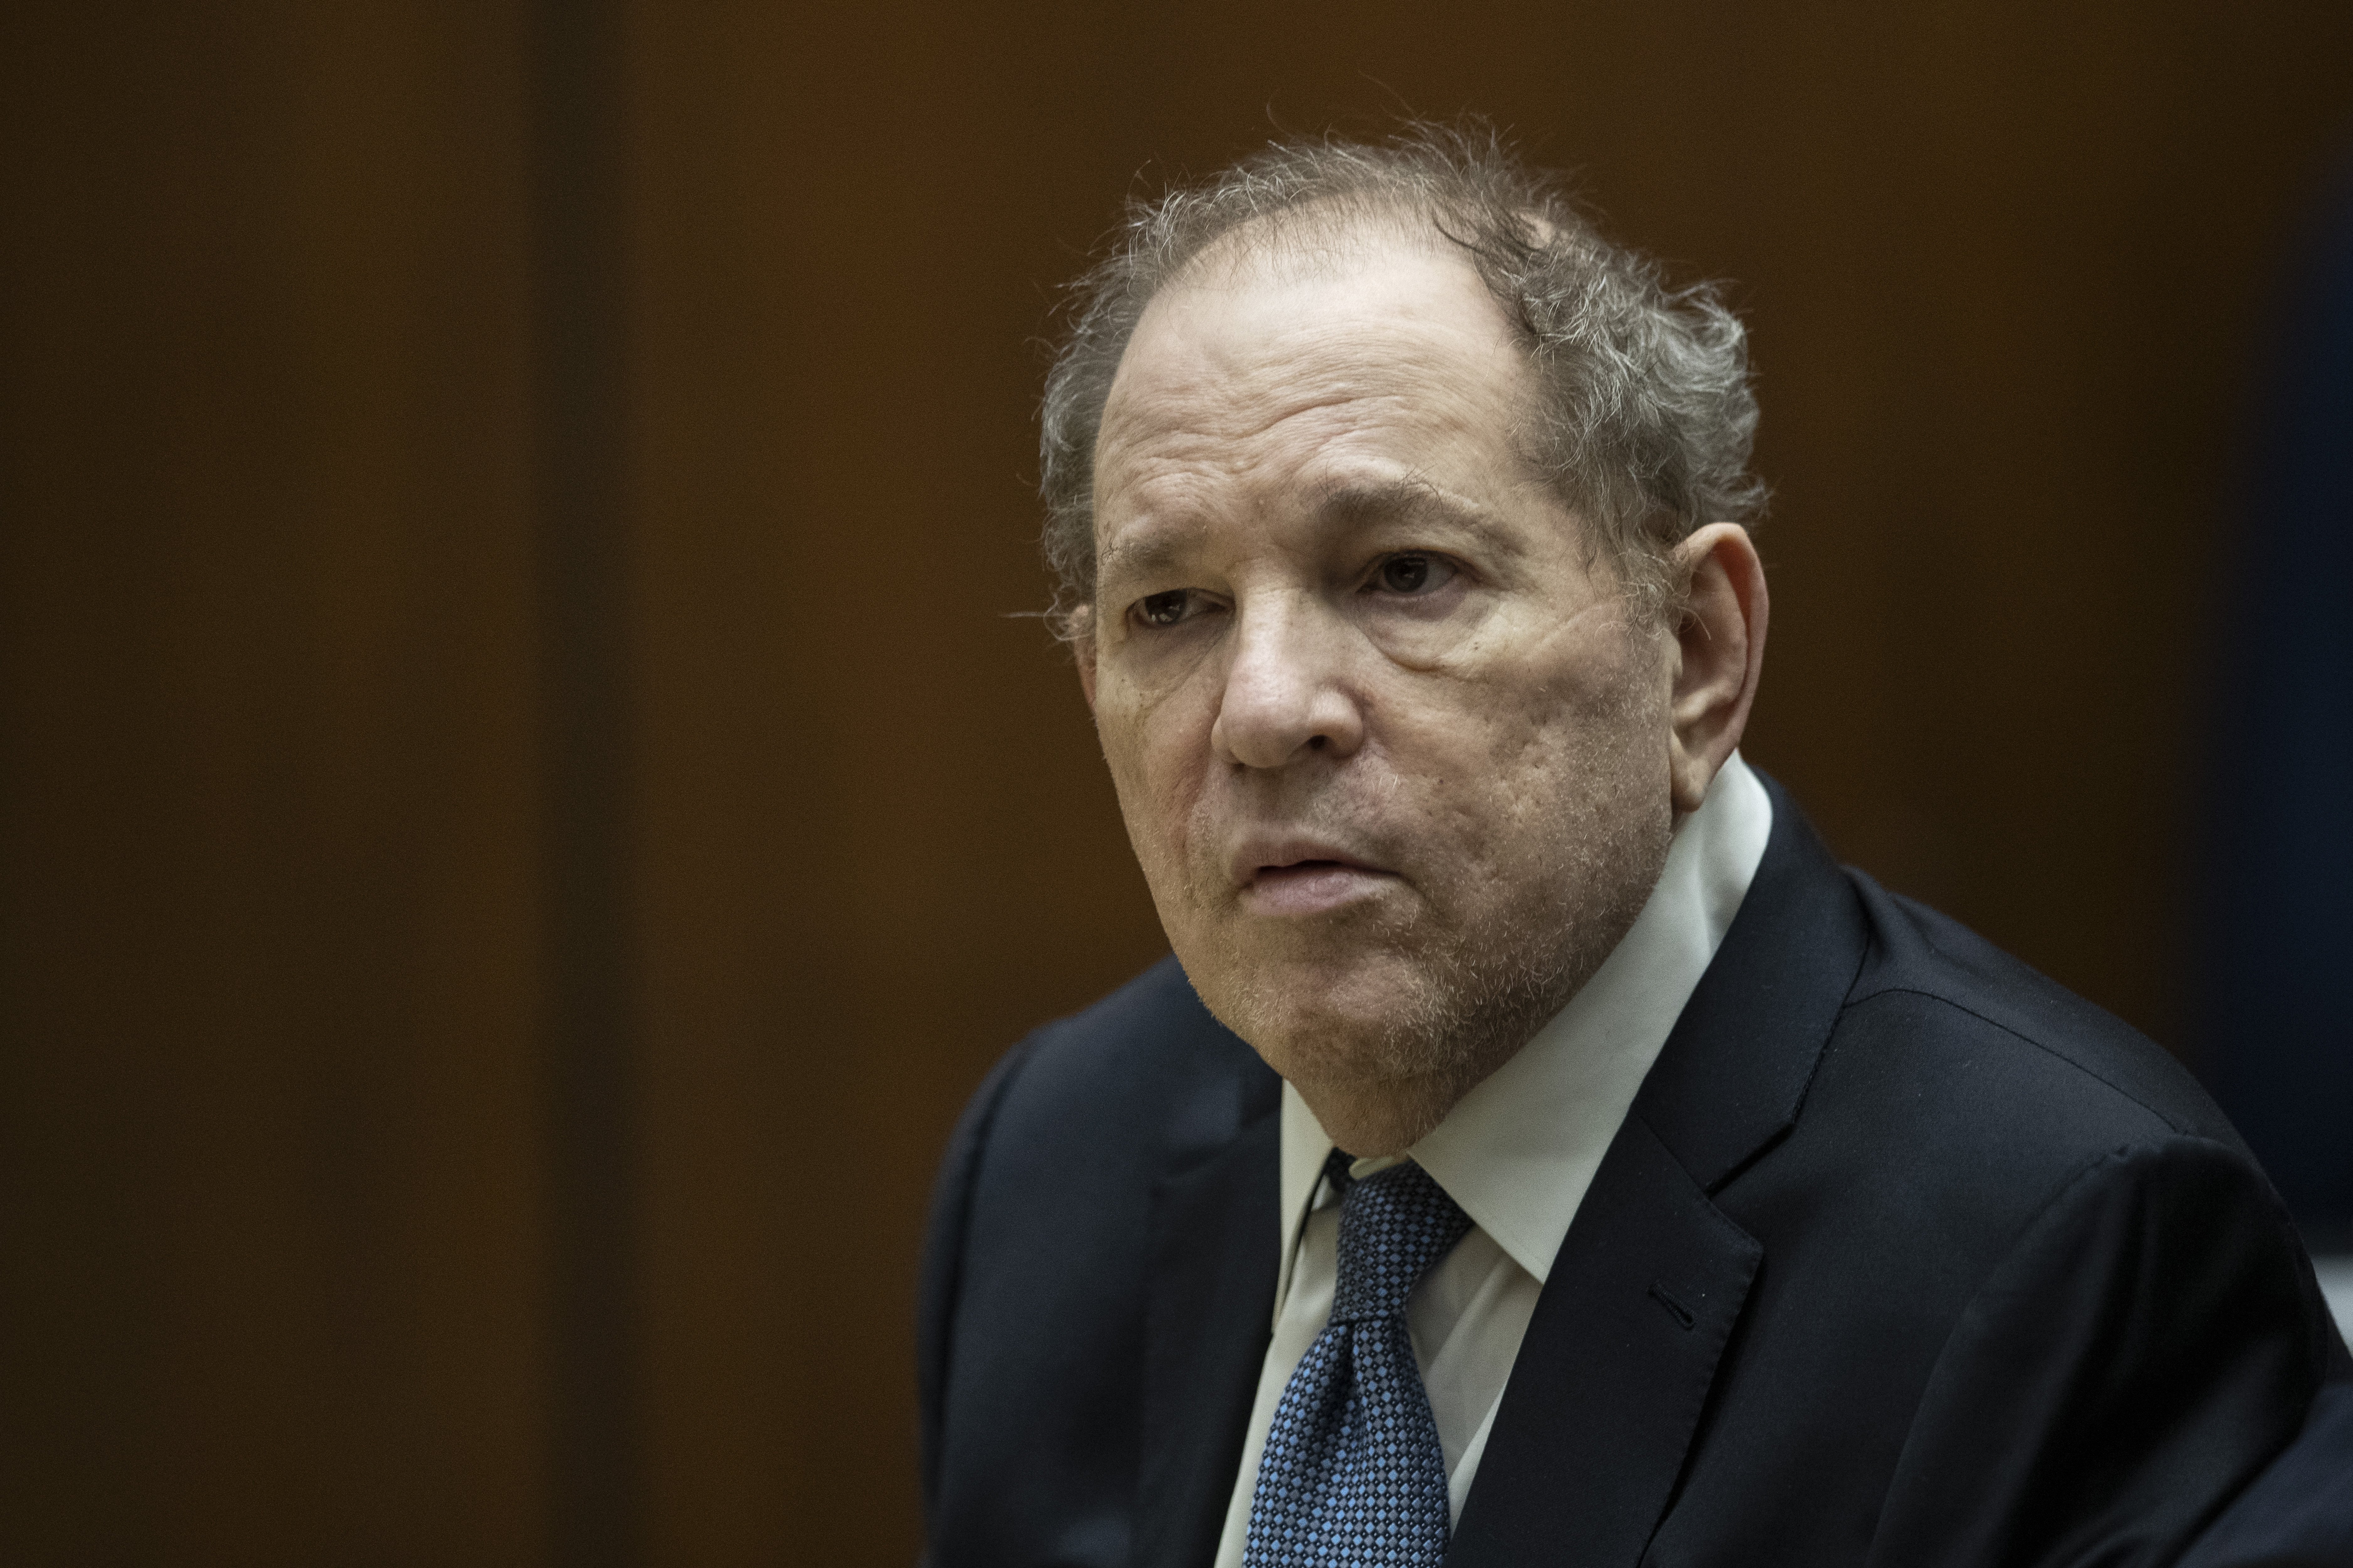 Jury in Harvey Weinstein Rape Case Completes Full Day of Deliberation With No Verdict